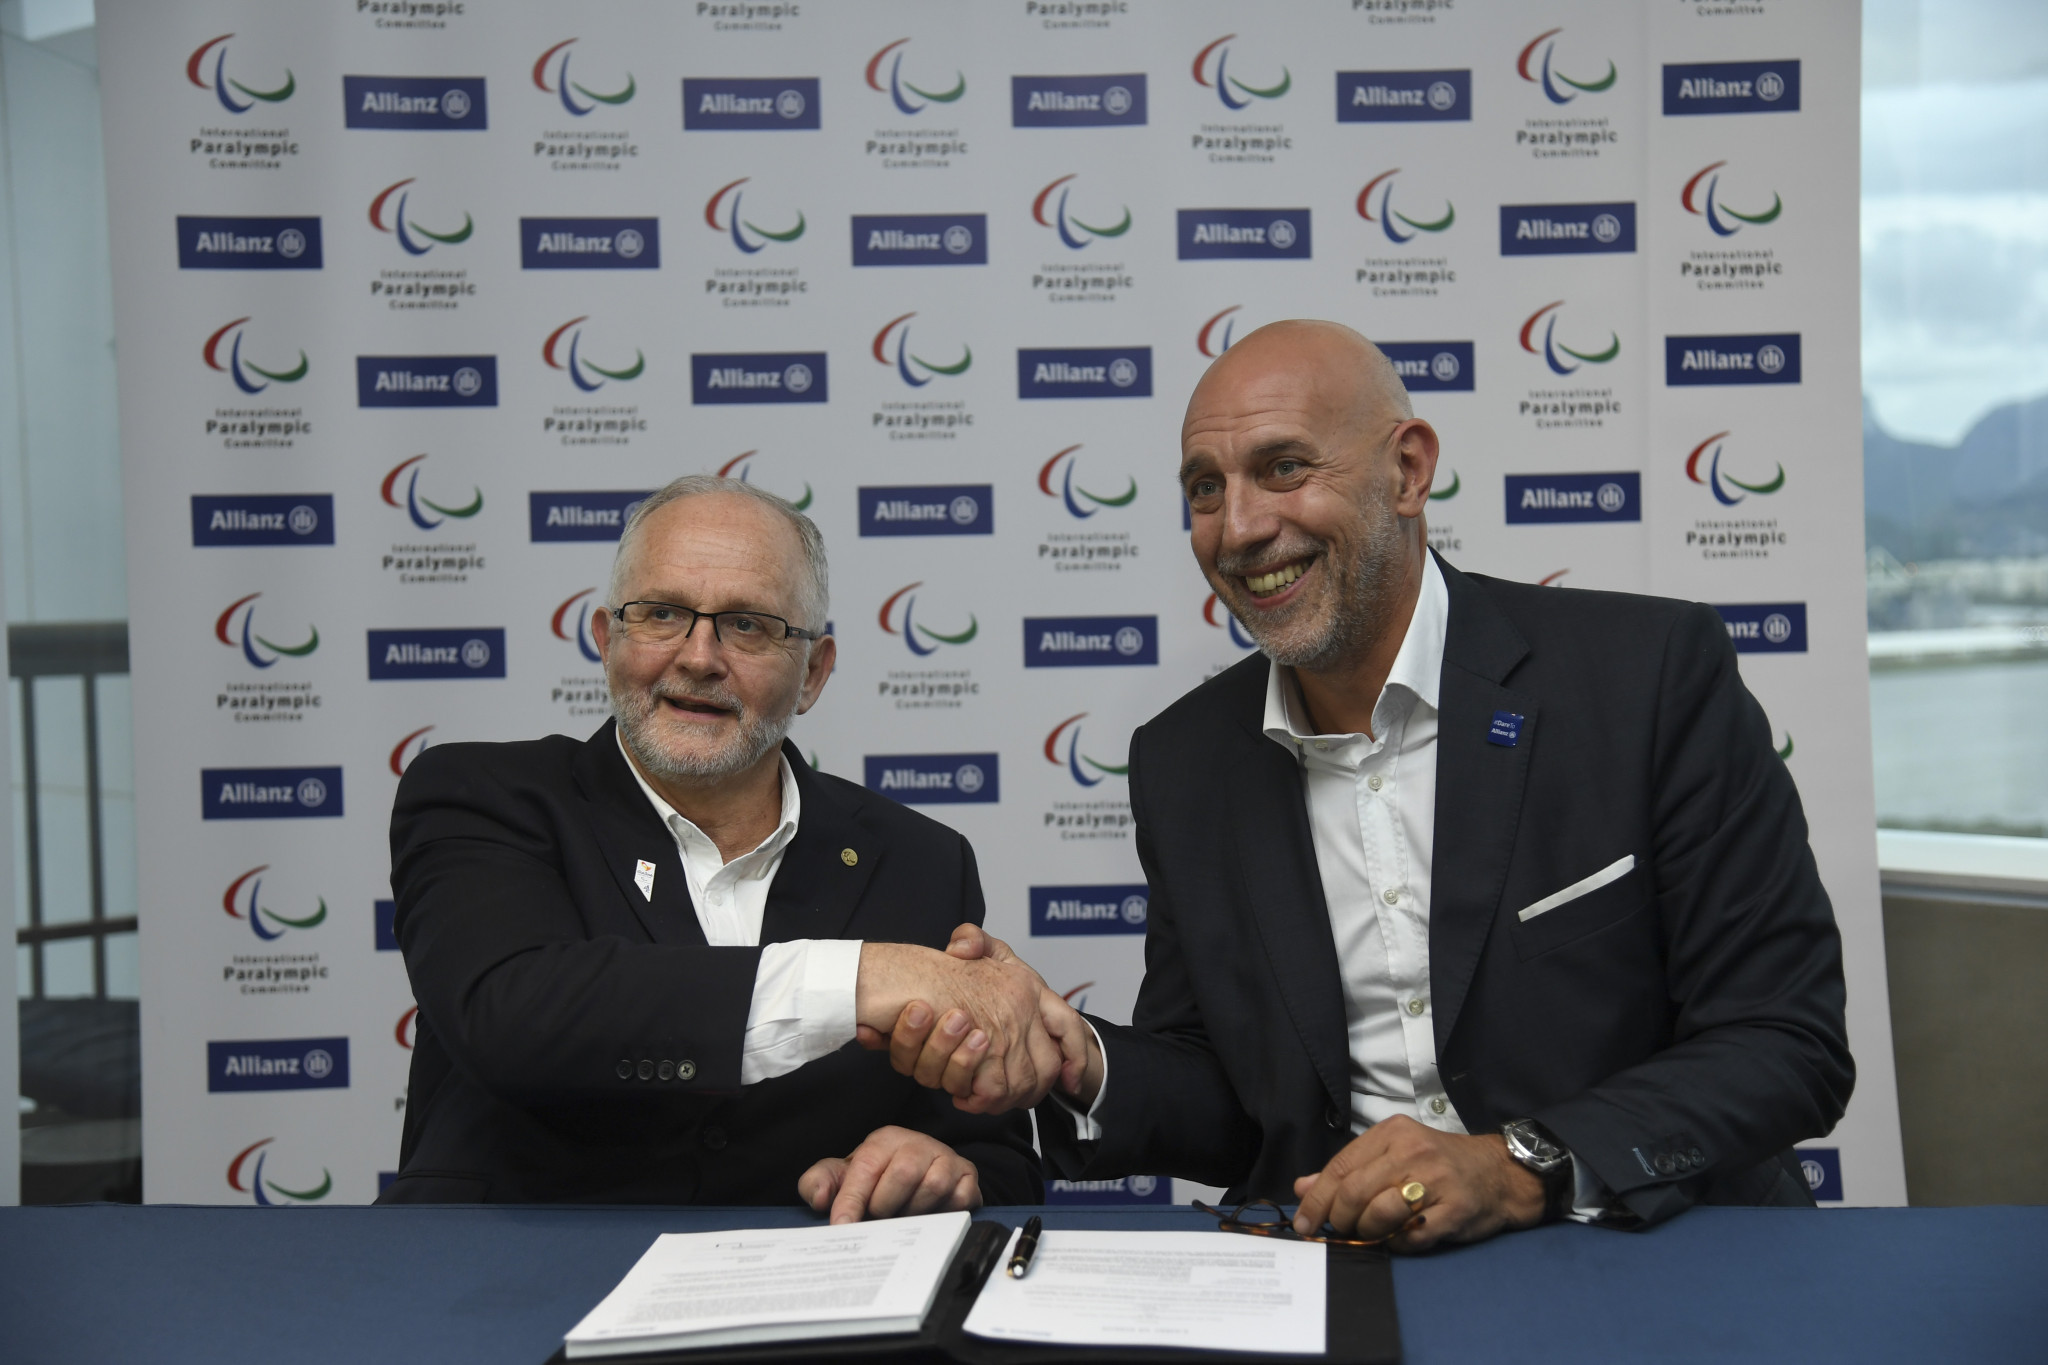 Allianz is a long-standing sponsor of the Paralympics and renewed its deal with the IPC in 2016 ©Getty Images